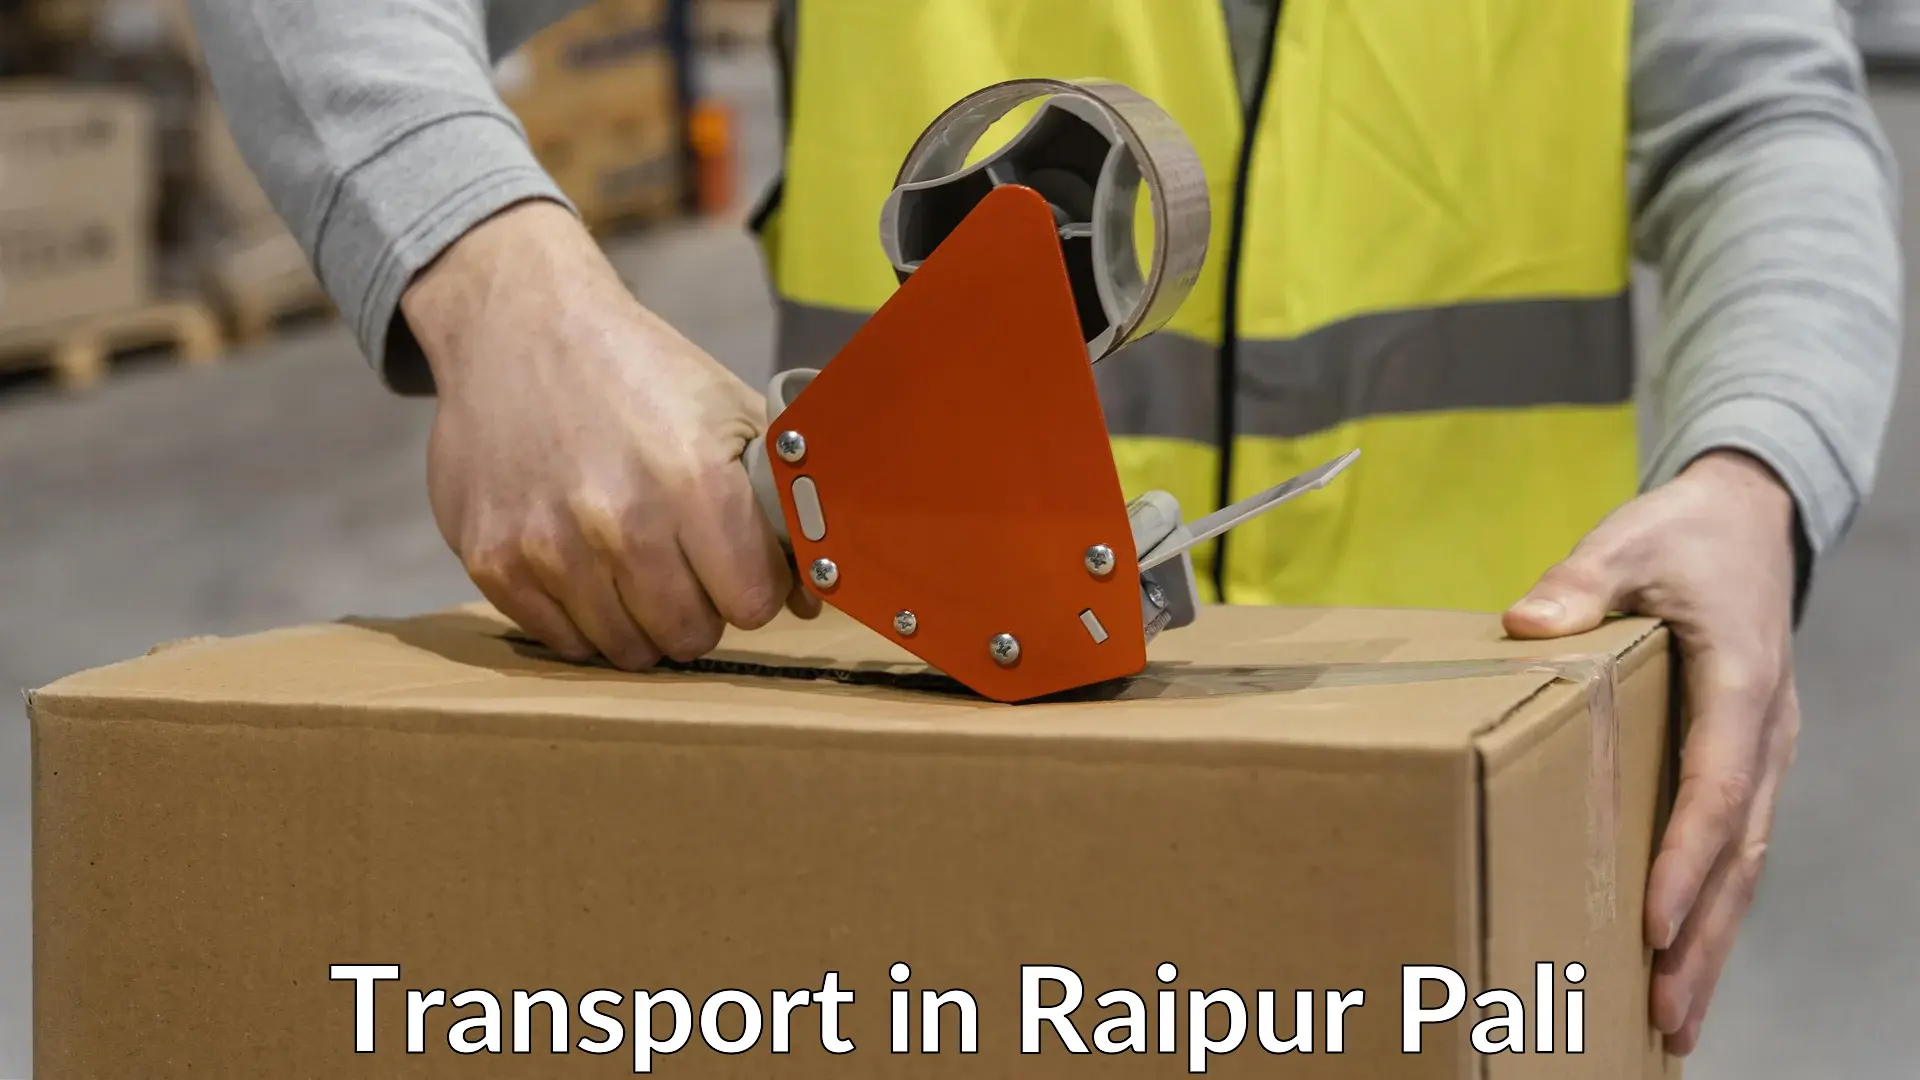 Vehicle transport services in Raipur Pali